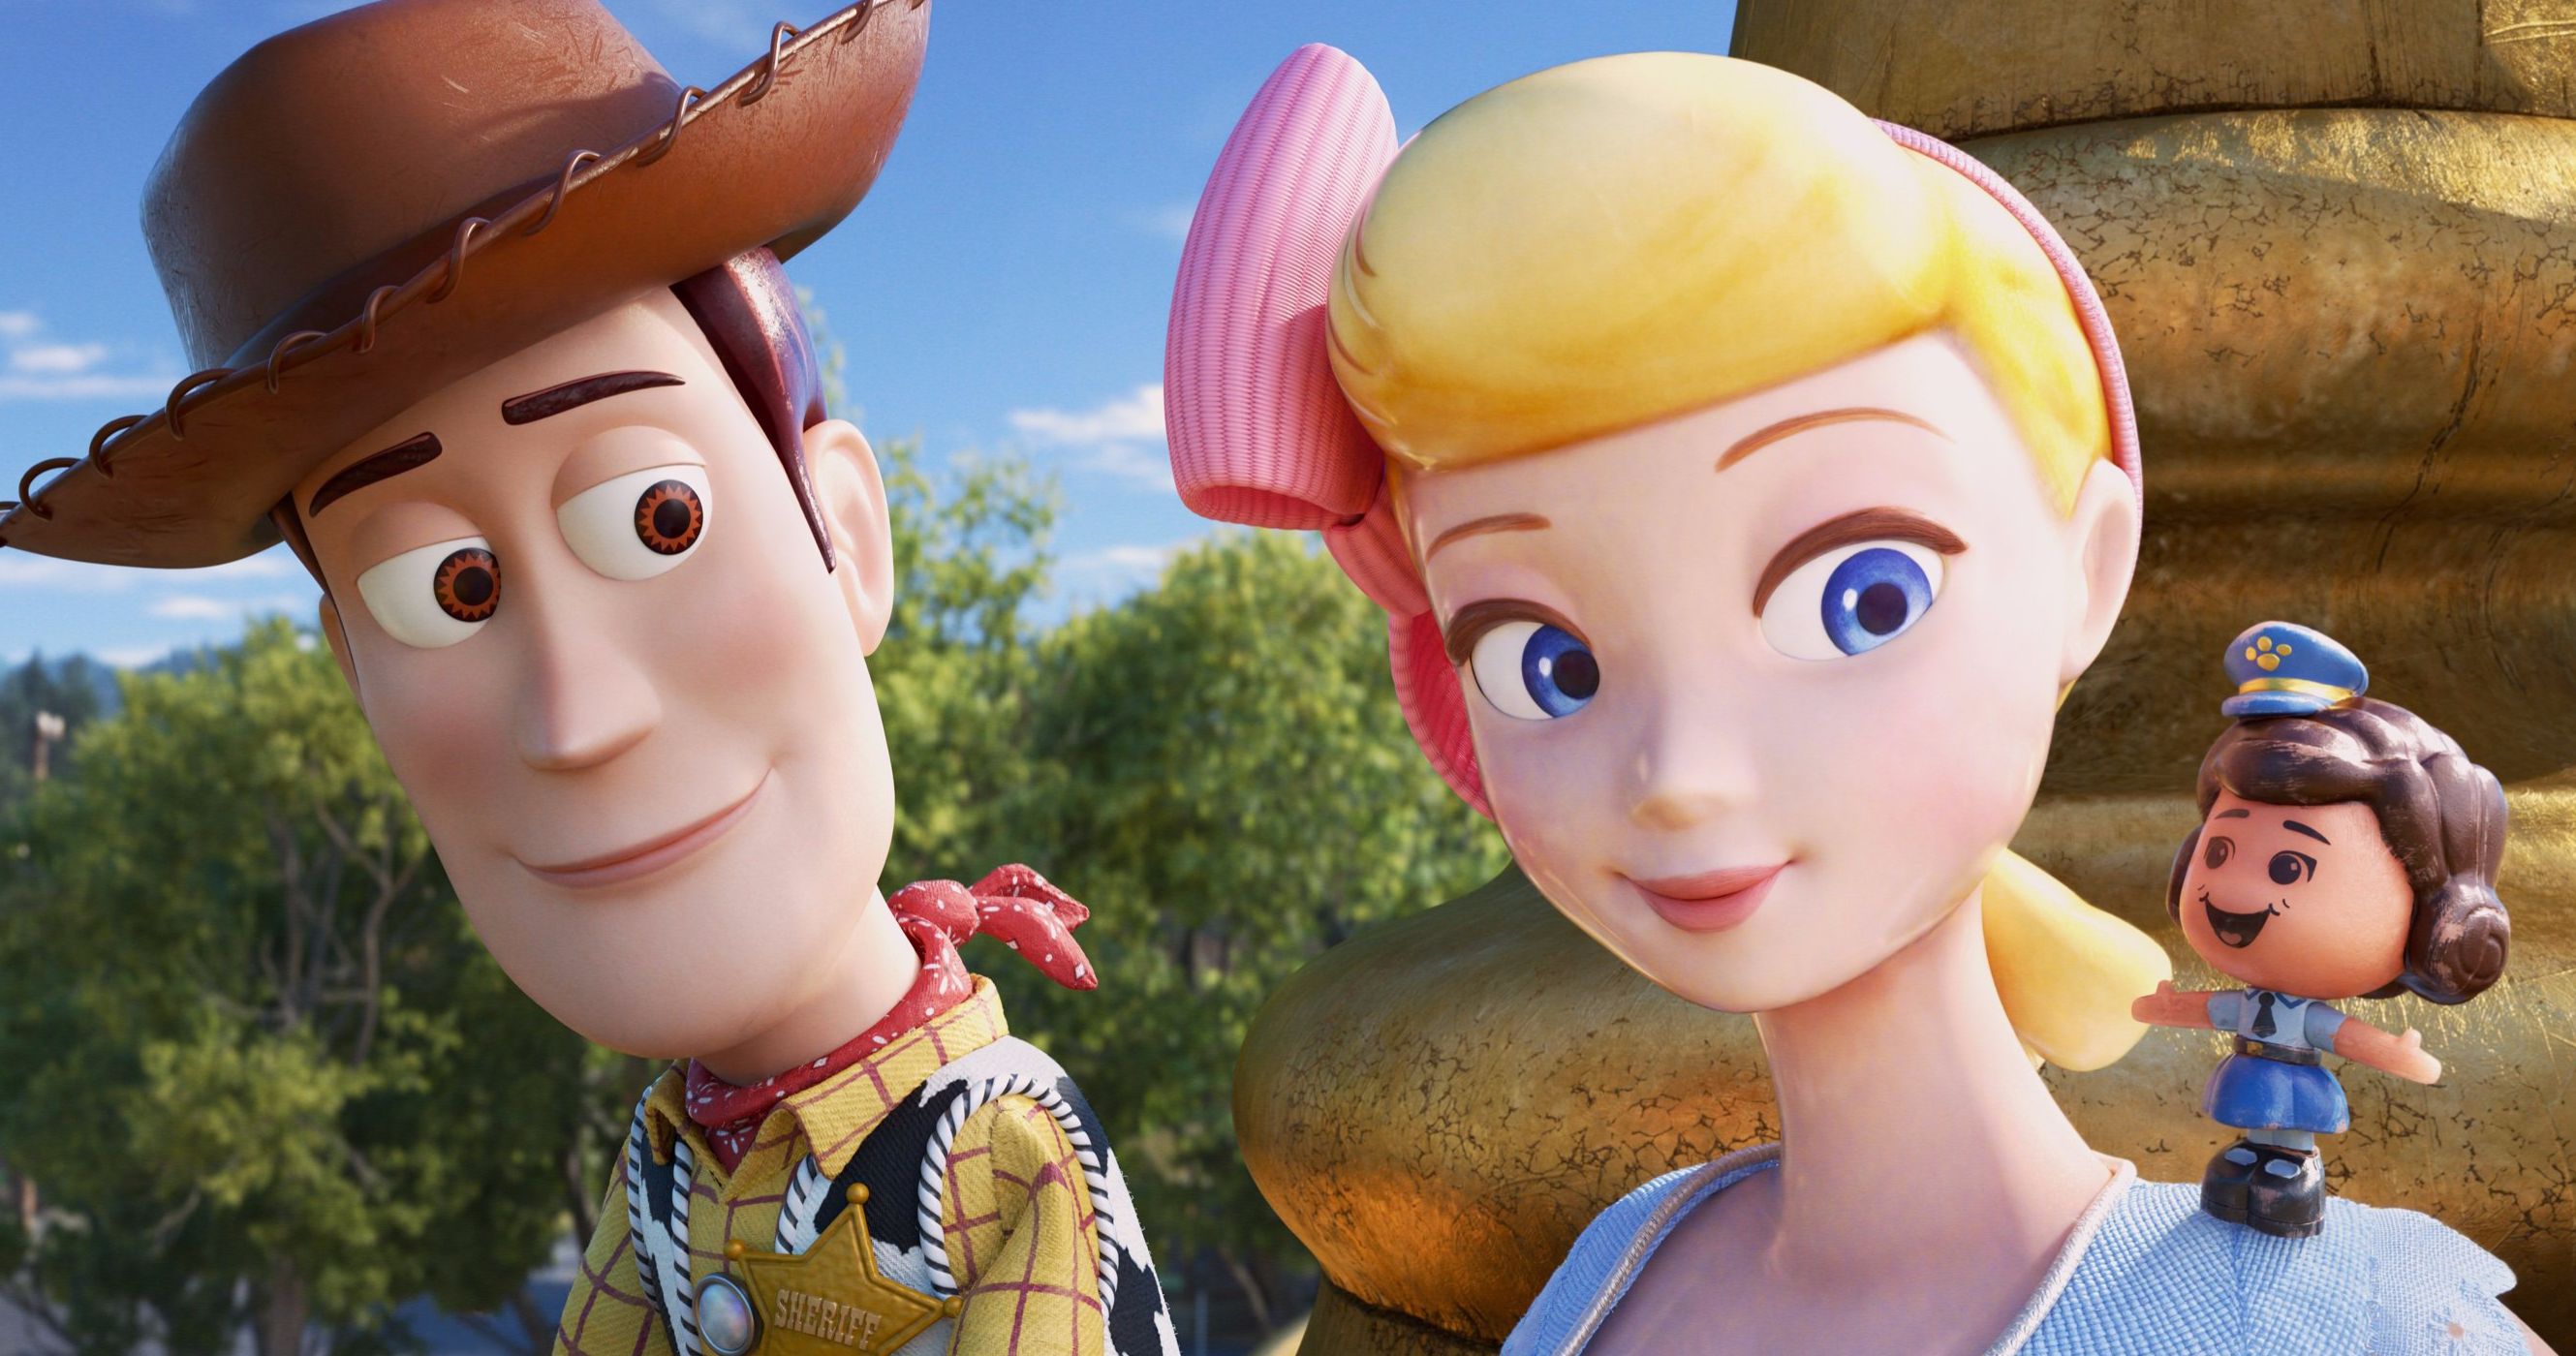 Toy Story 4 Alternate Ending Brings Unexpected Twist for Woody &amp; Bo Peep